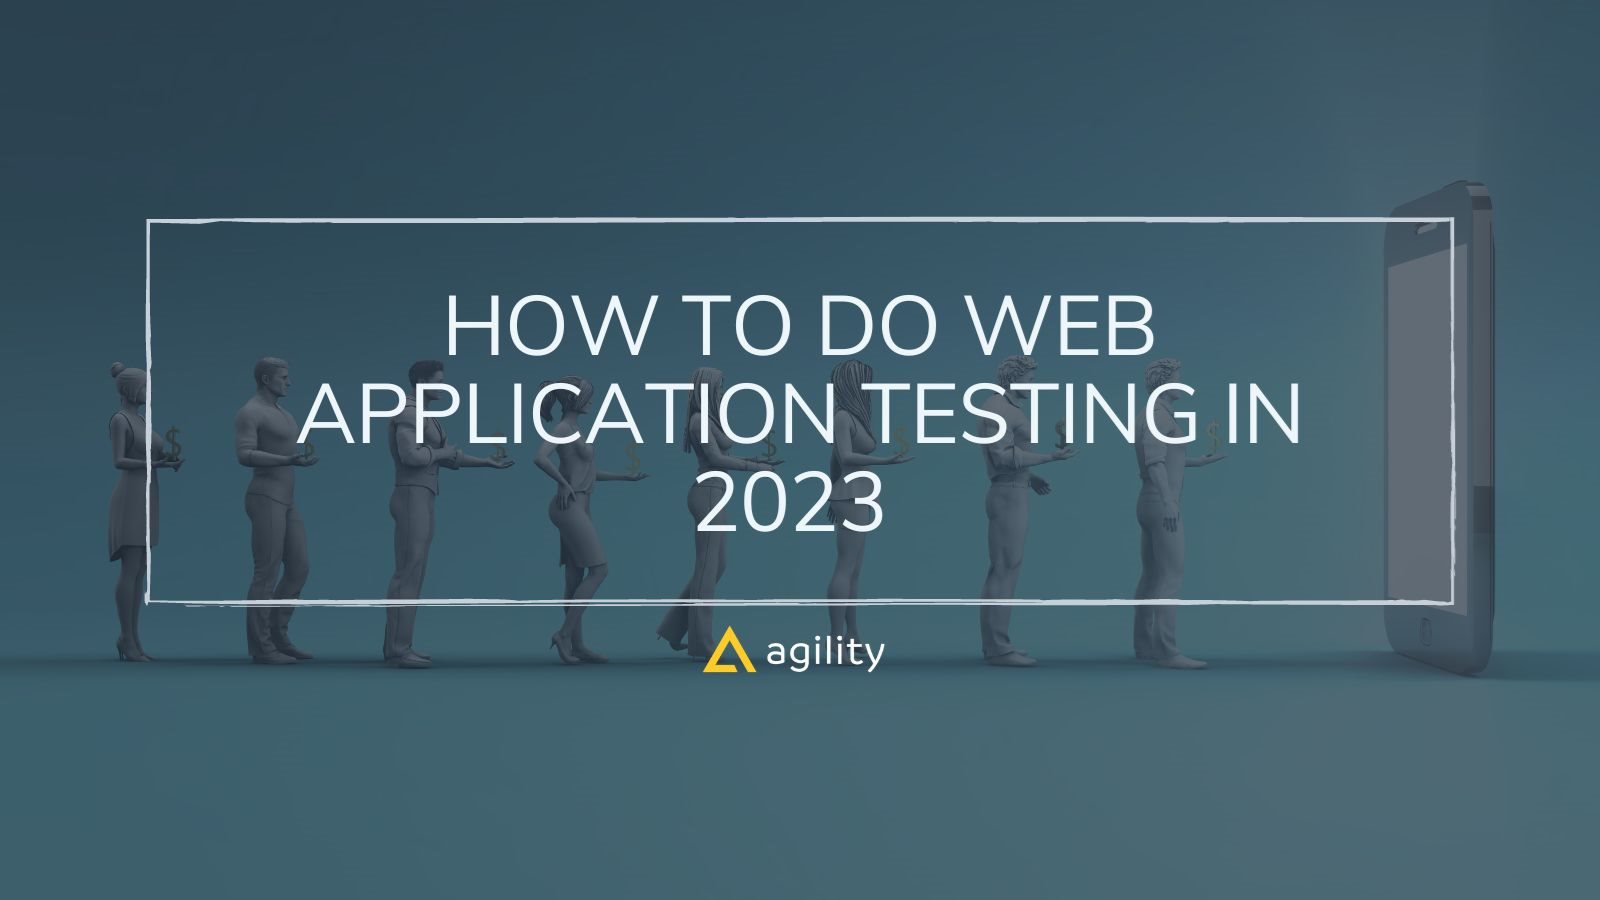 Web Application Testing in 2023